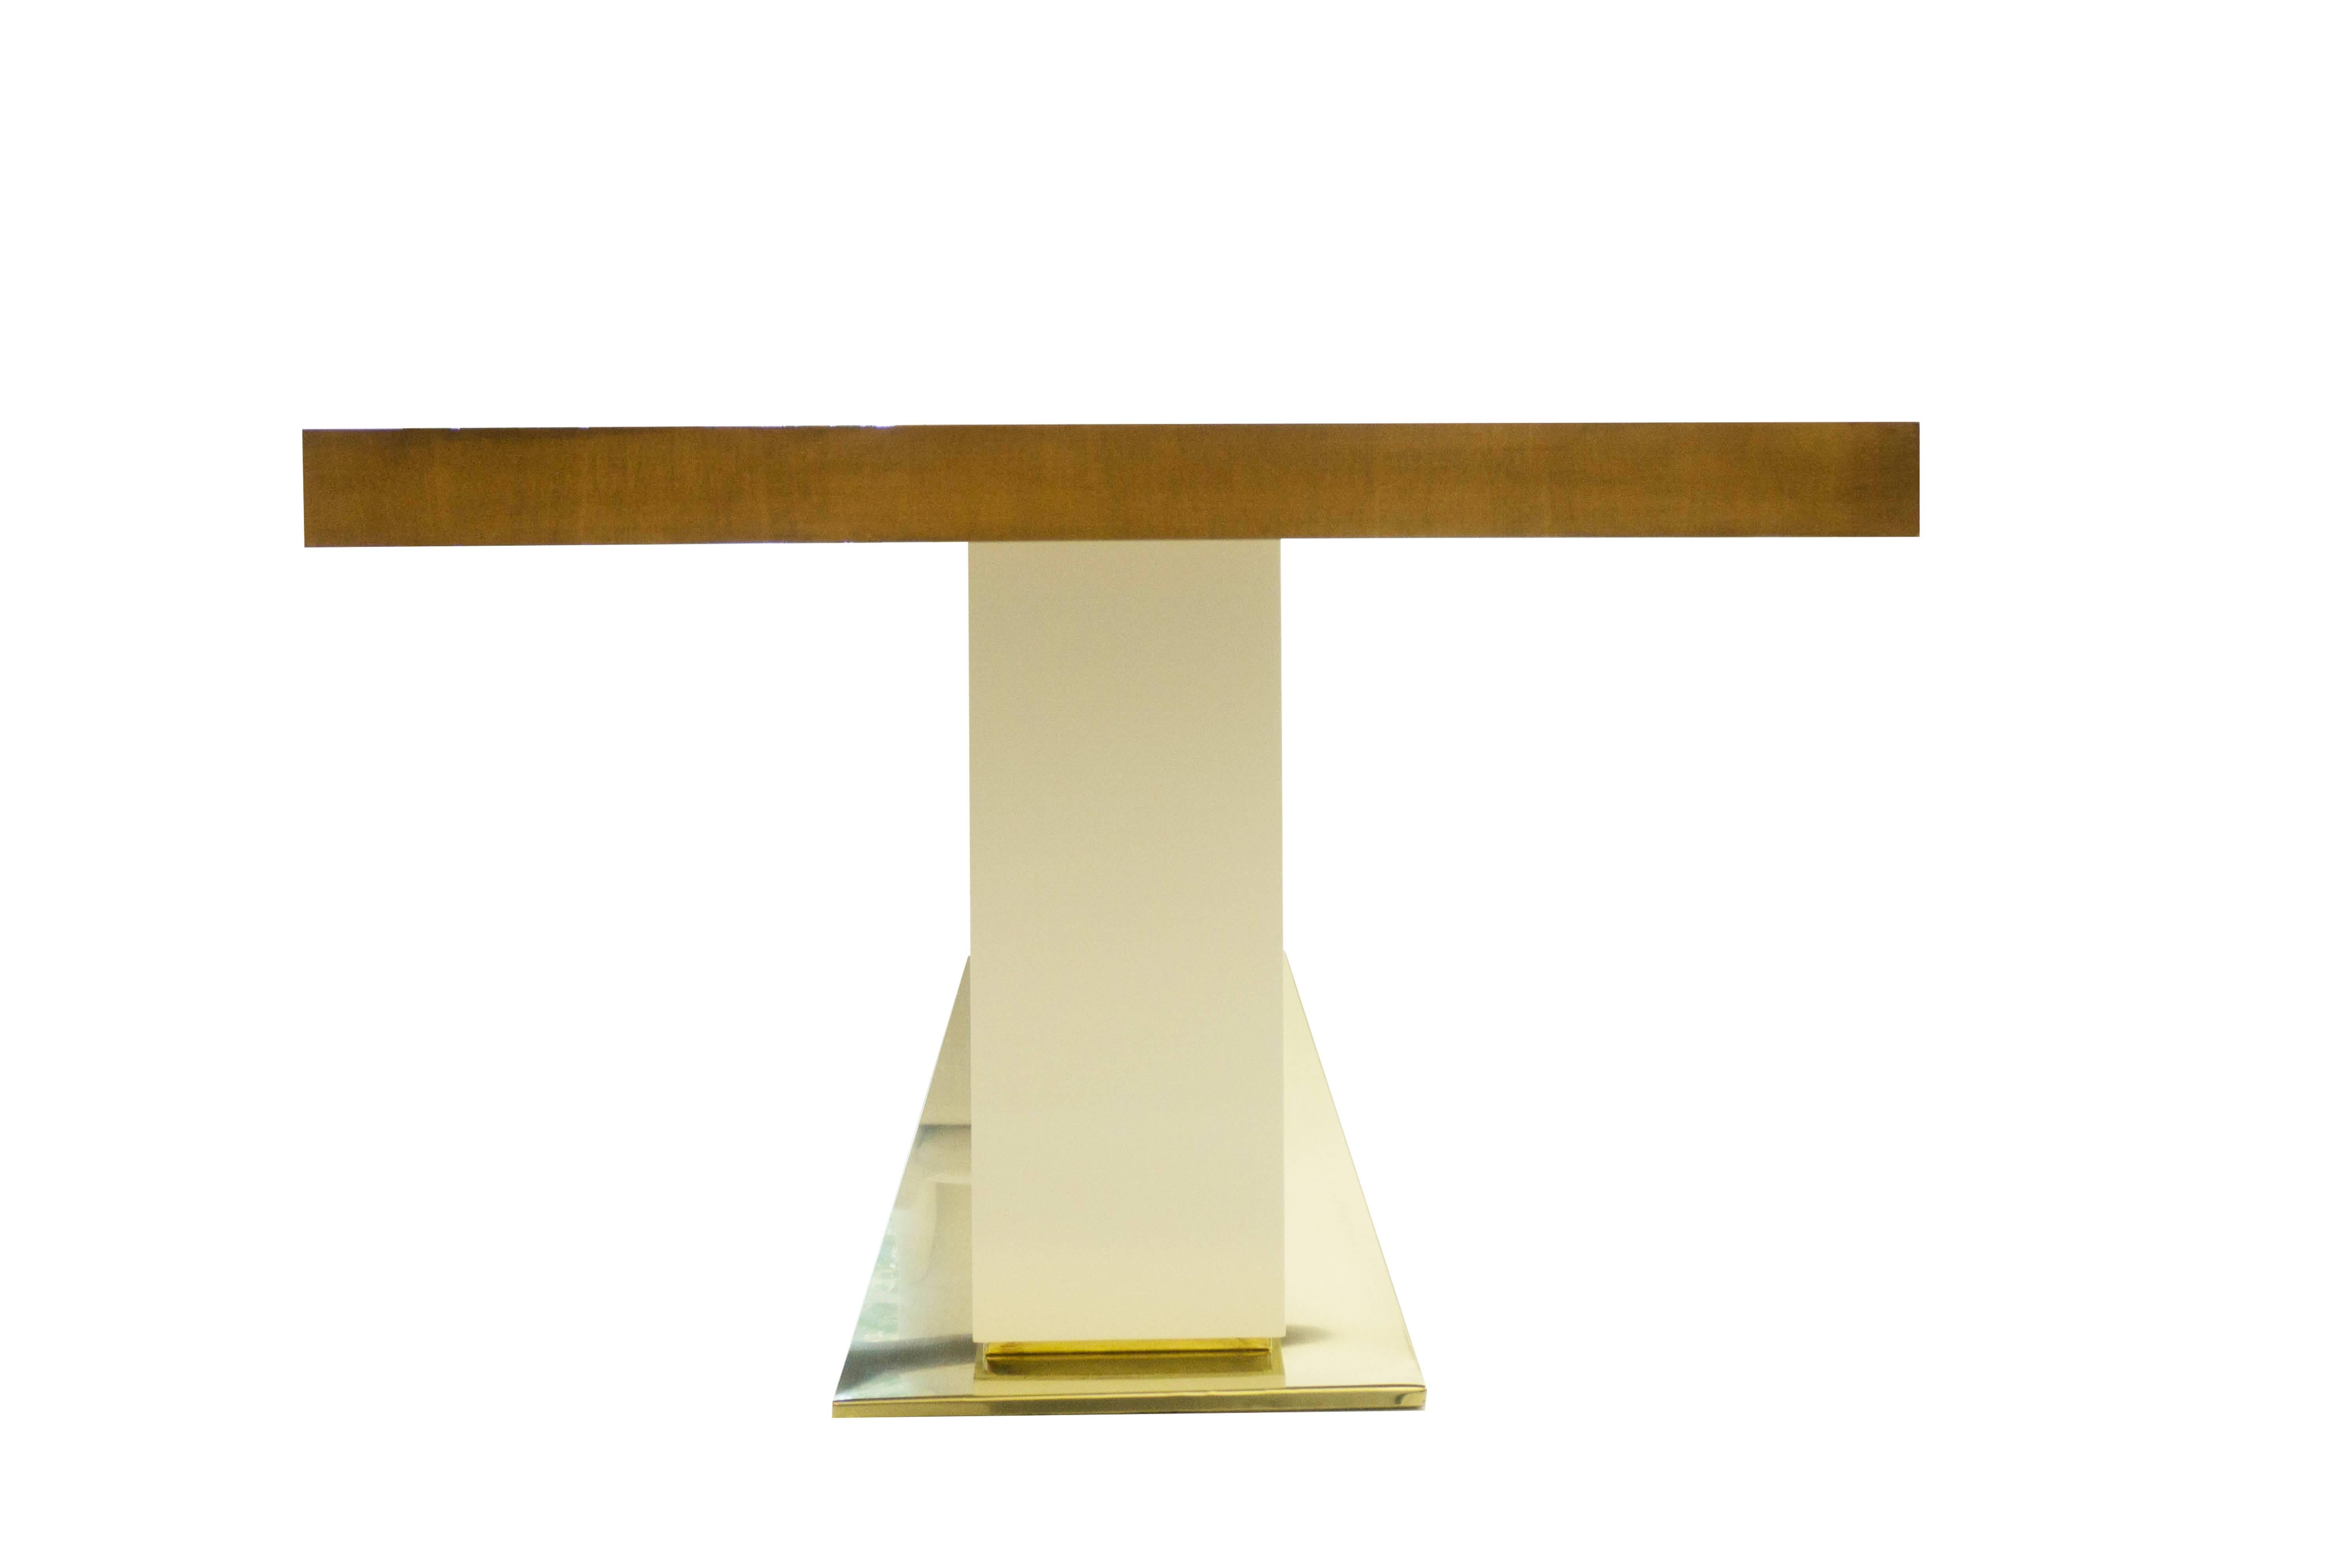 Polished brass based, white lacquered wood pedestal with three-ring design, and wood top with honey-walnut finish. Original design by Jhon Ortiz. The table has a grandiose presence and seats 8 comfortably, 10 snugly. Pairs well with our Scandinavian